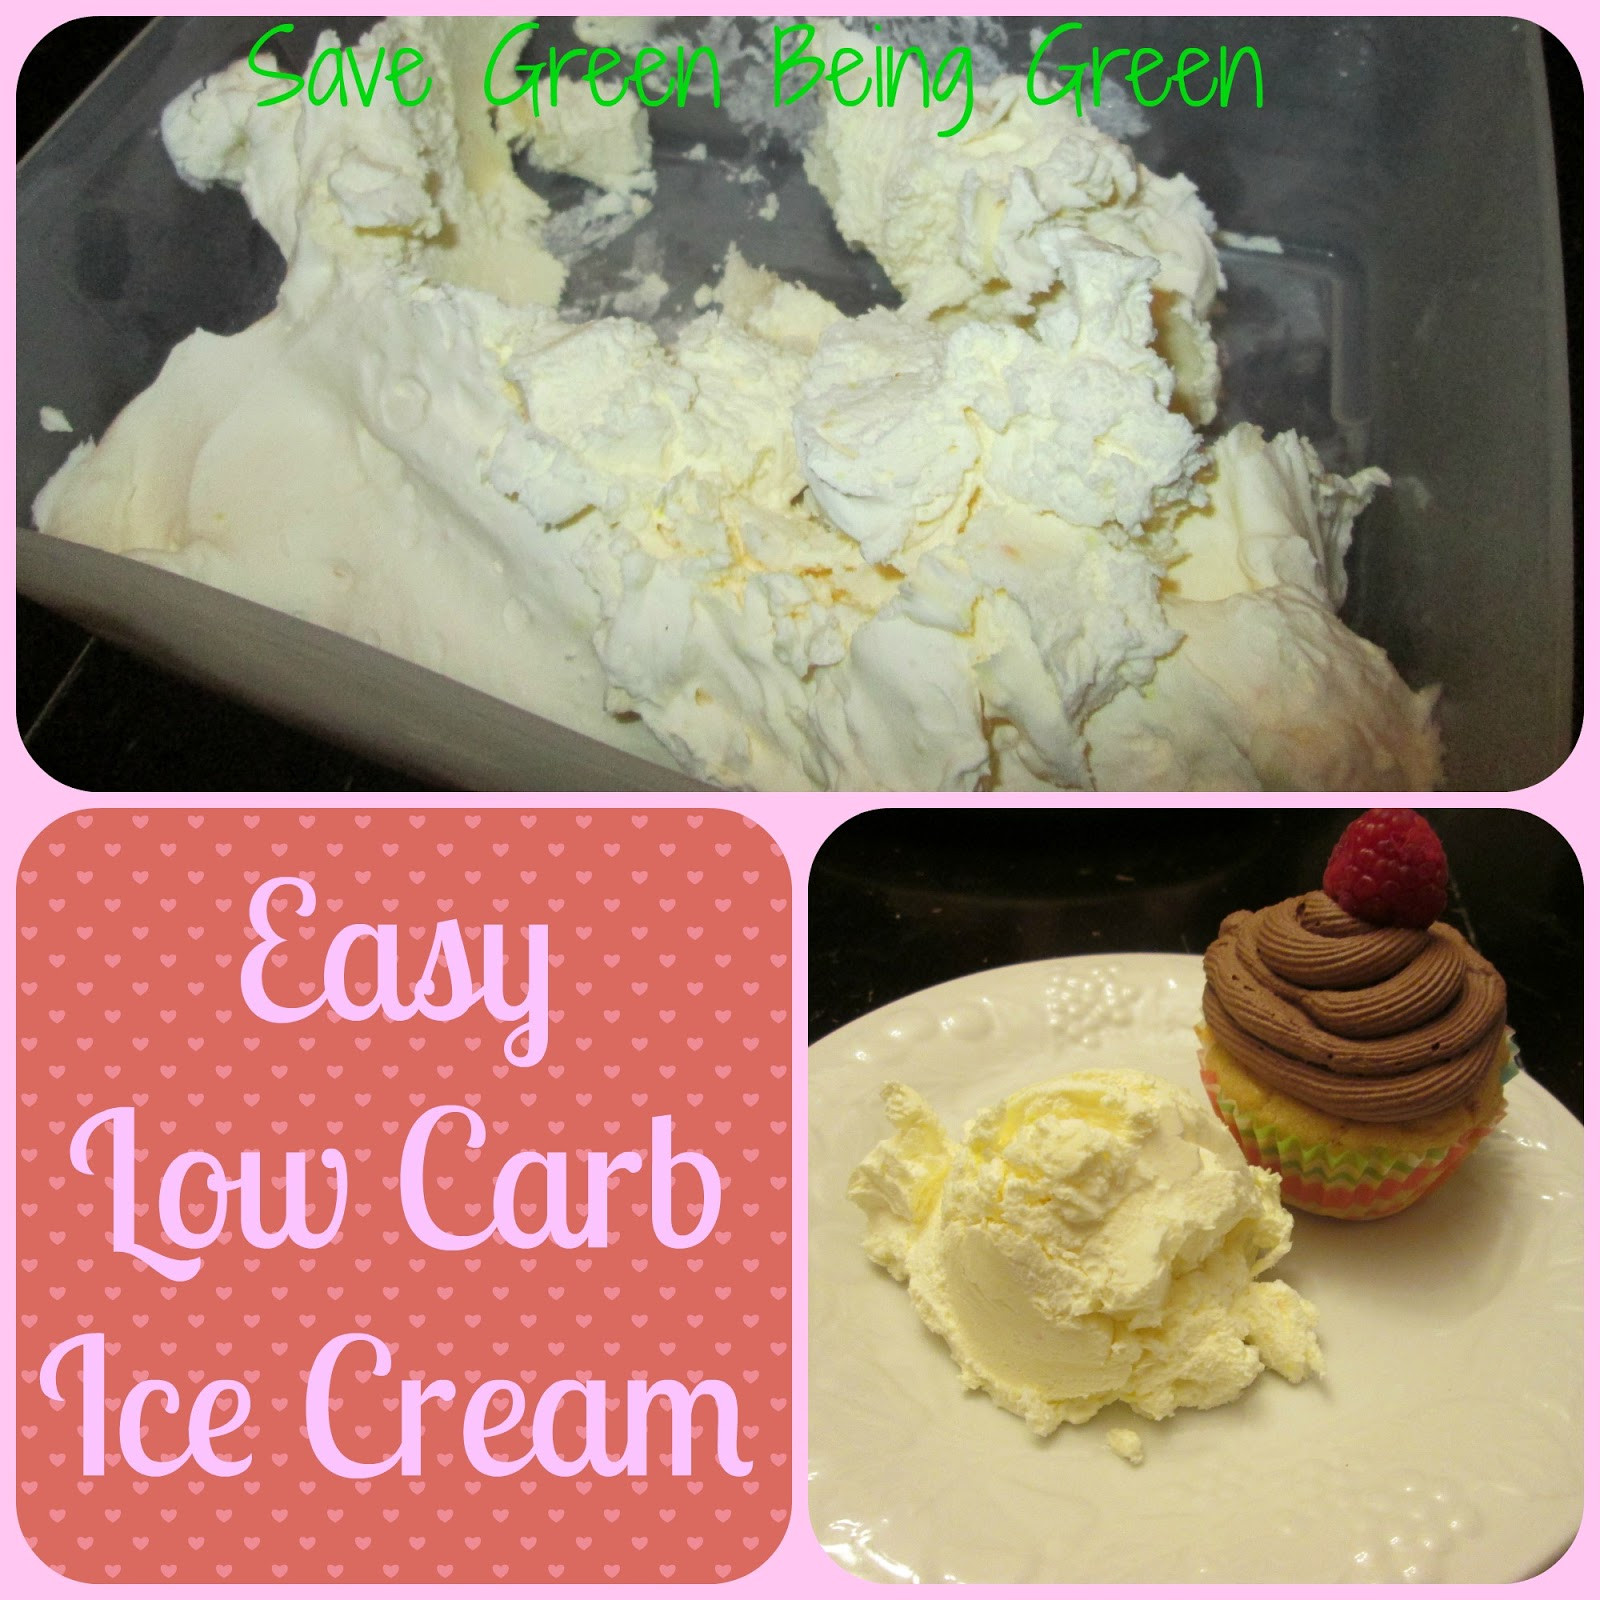 Low Carb Ice Cream Recipes
 Save Green Being Green Easy Low Carb "Ice Cream"